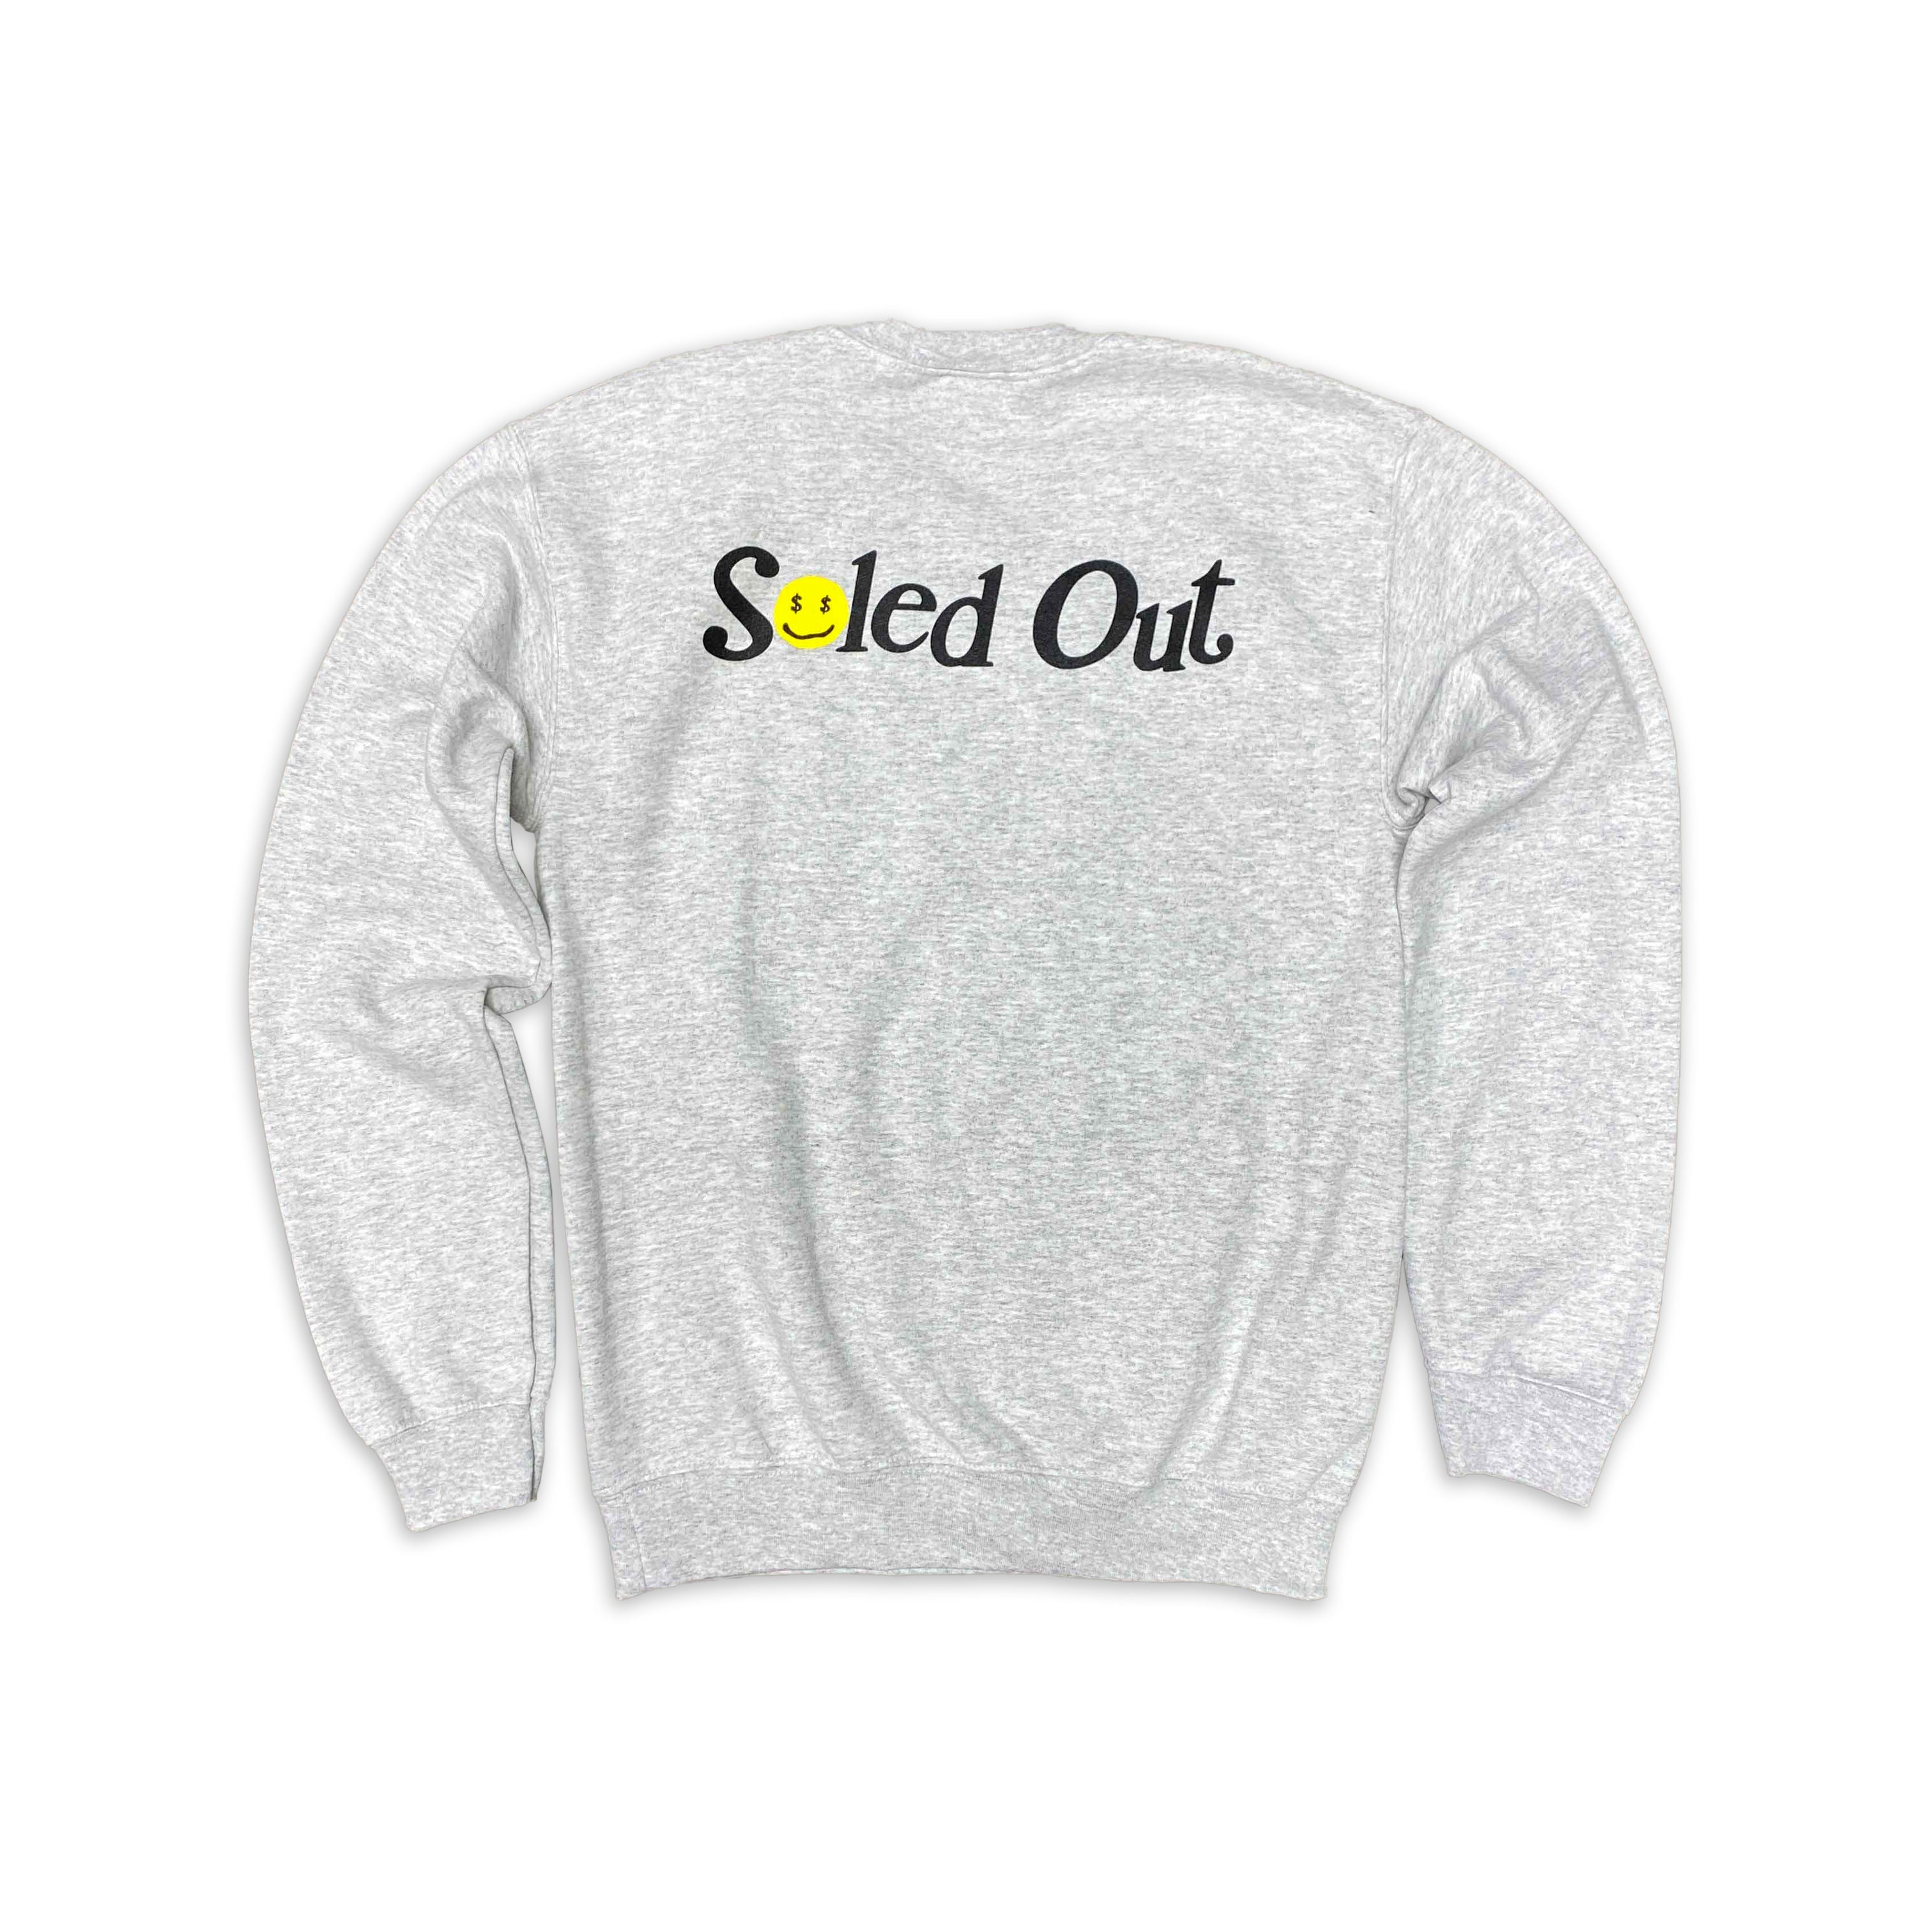 Soled Out Crewneck Sweater "EXPENSIVE" Ash New Size M